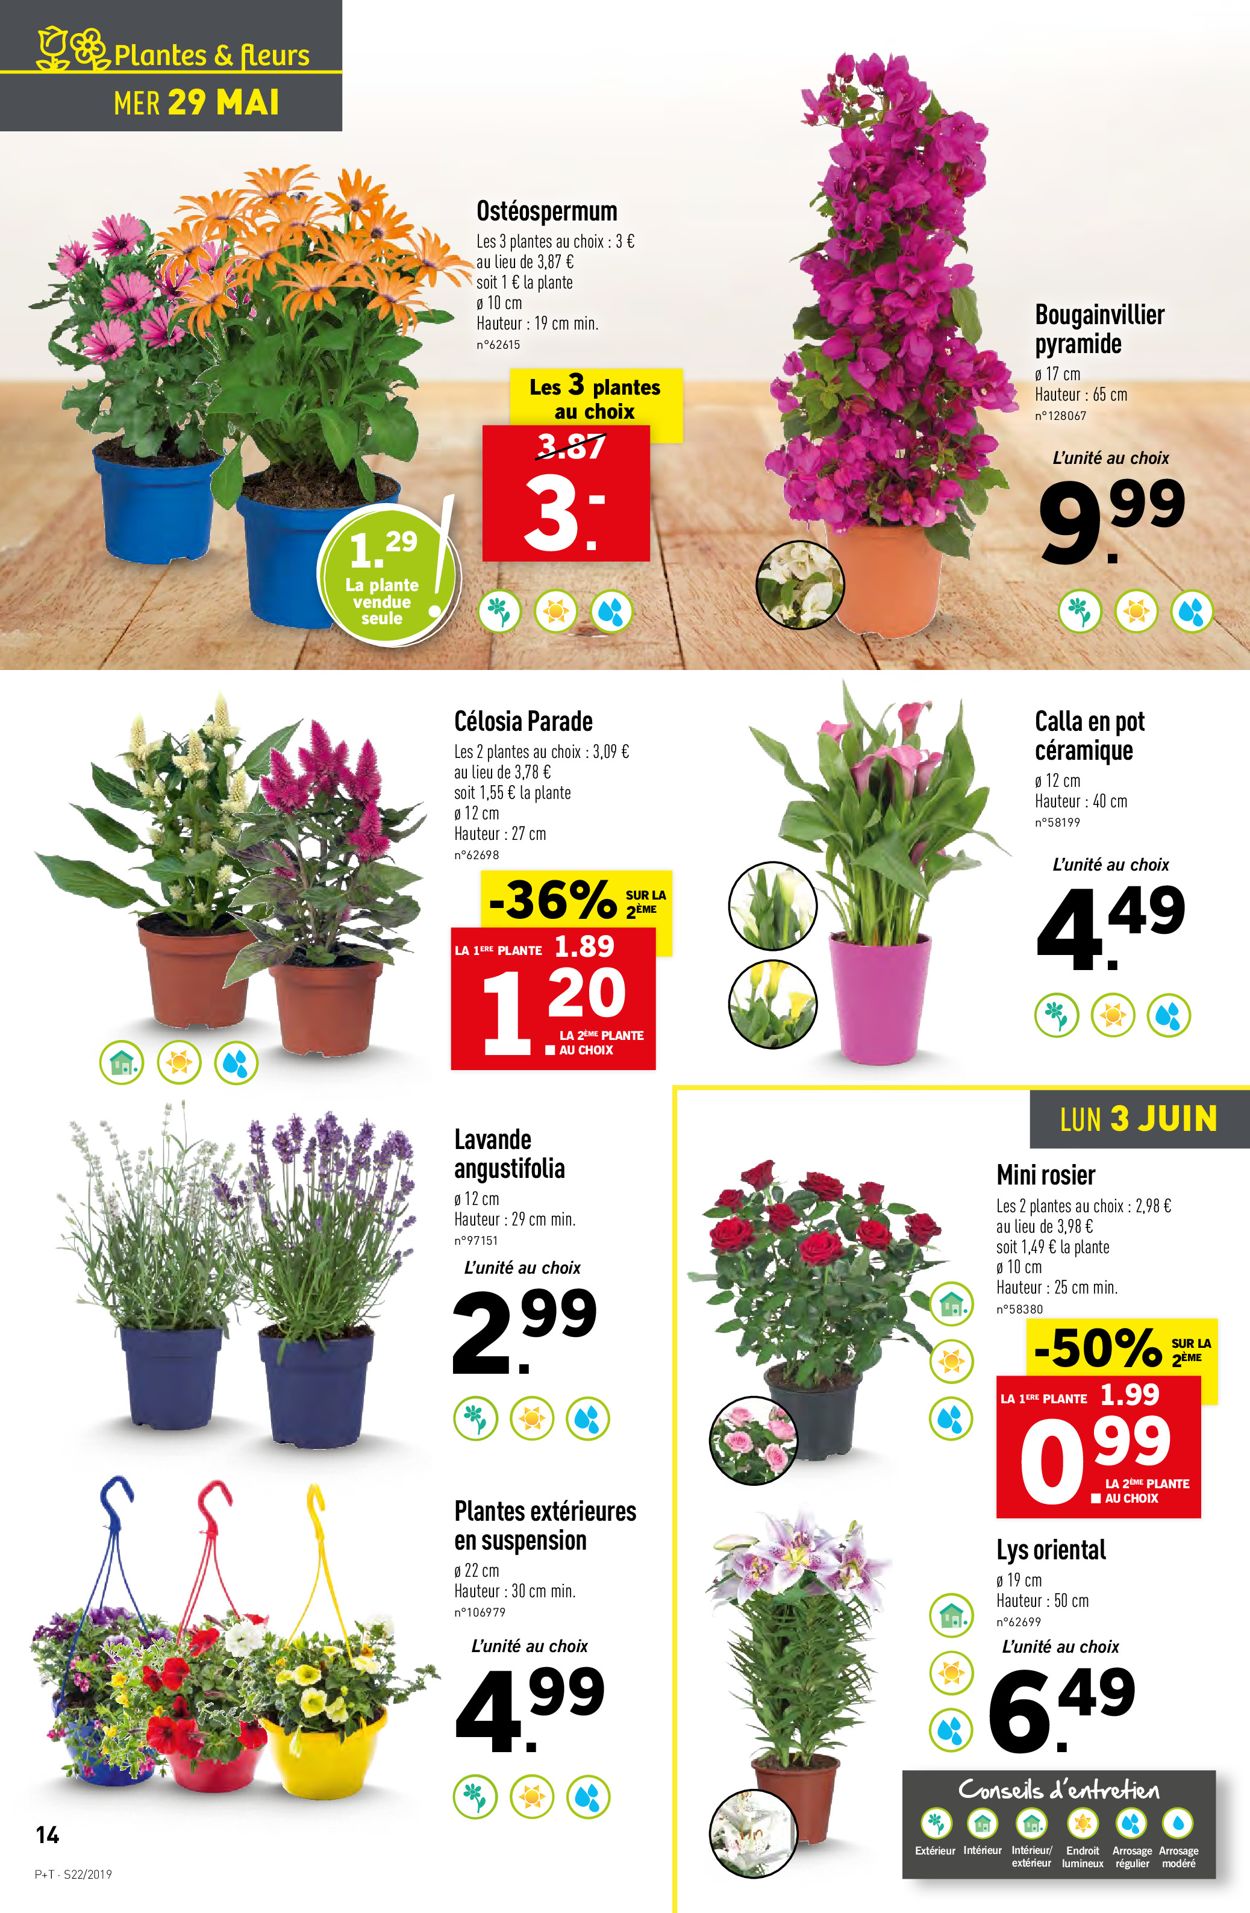 Lidl Catalogue - 29.05-04.06.2019 (Page 14)